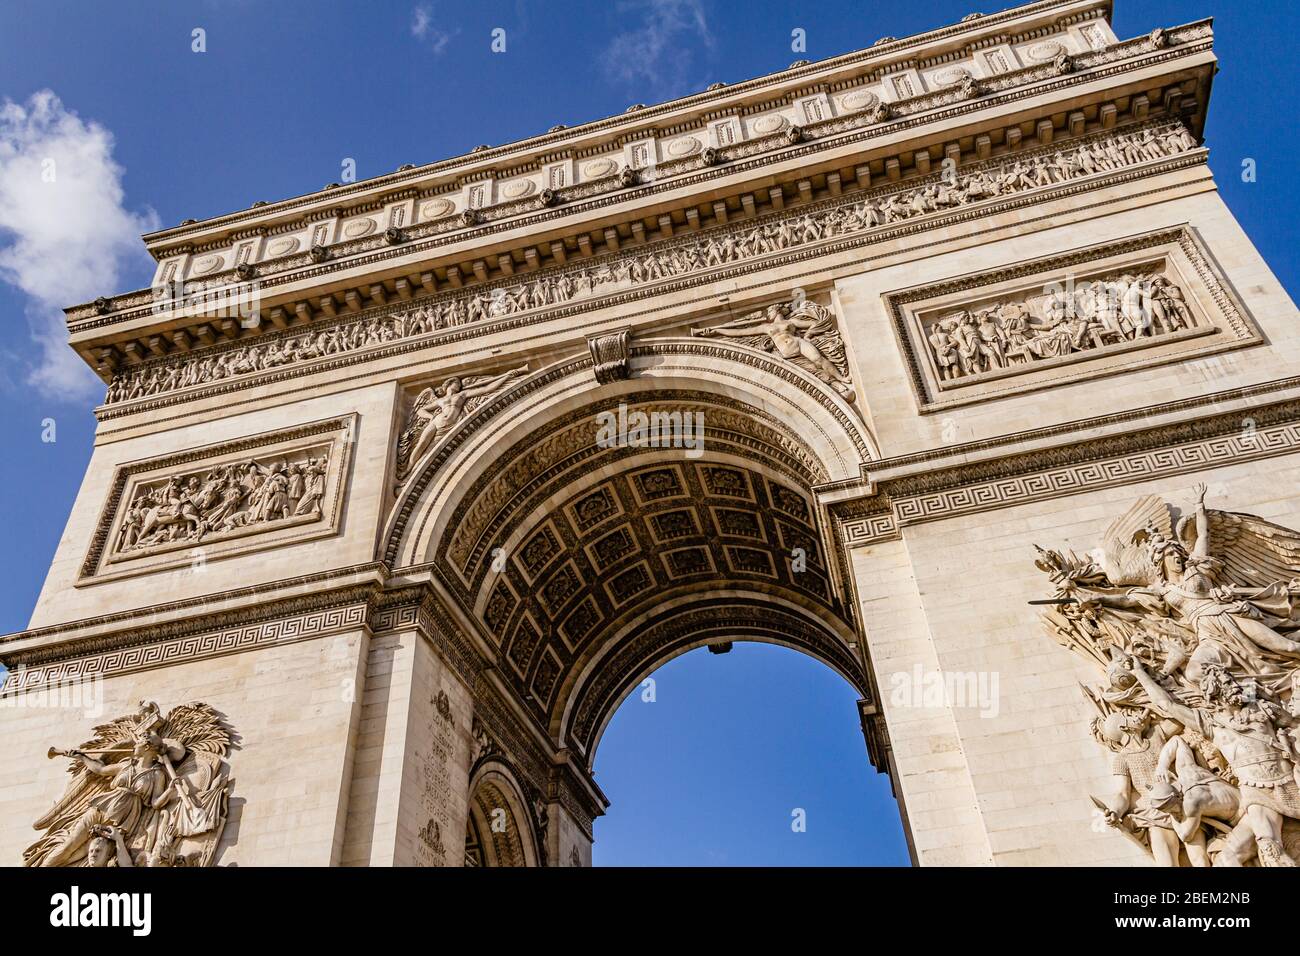 Close-up of the Arc de Triomphe, a major monument in Paris, France. February 2020. Stock Photo